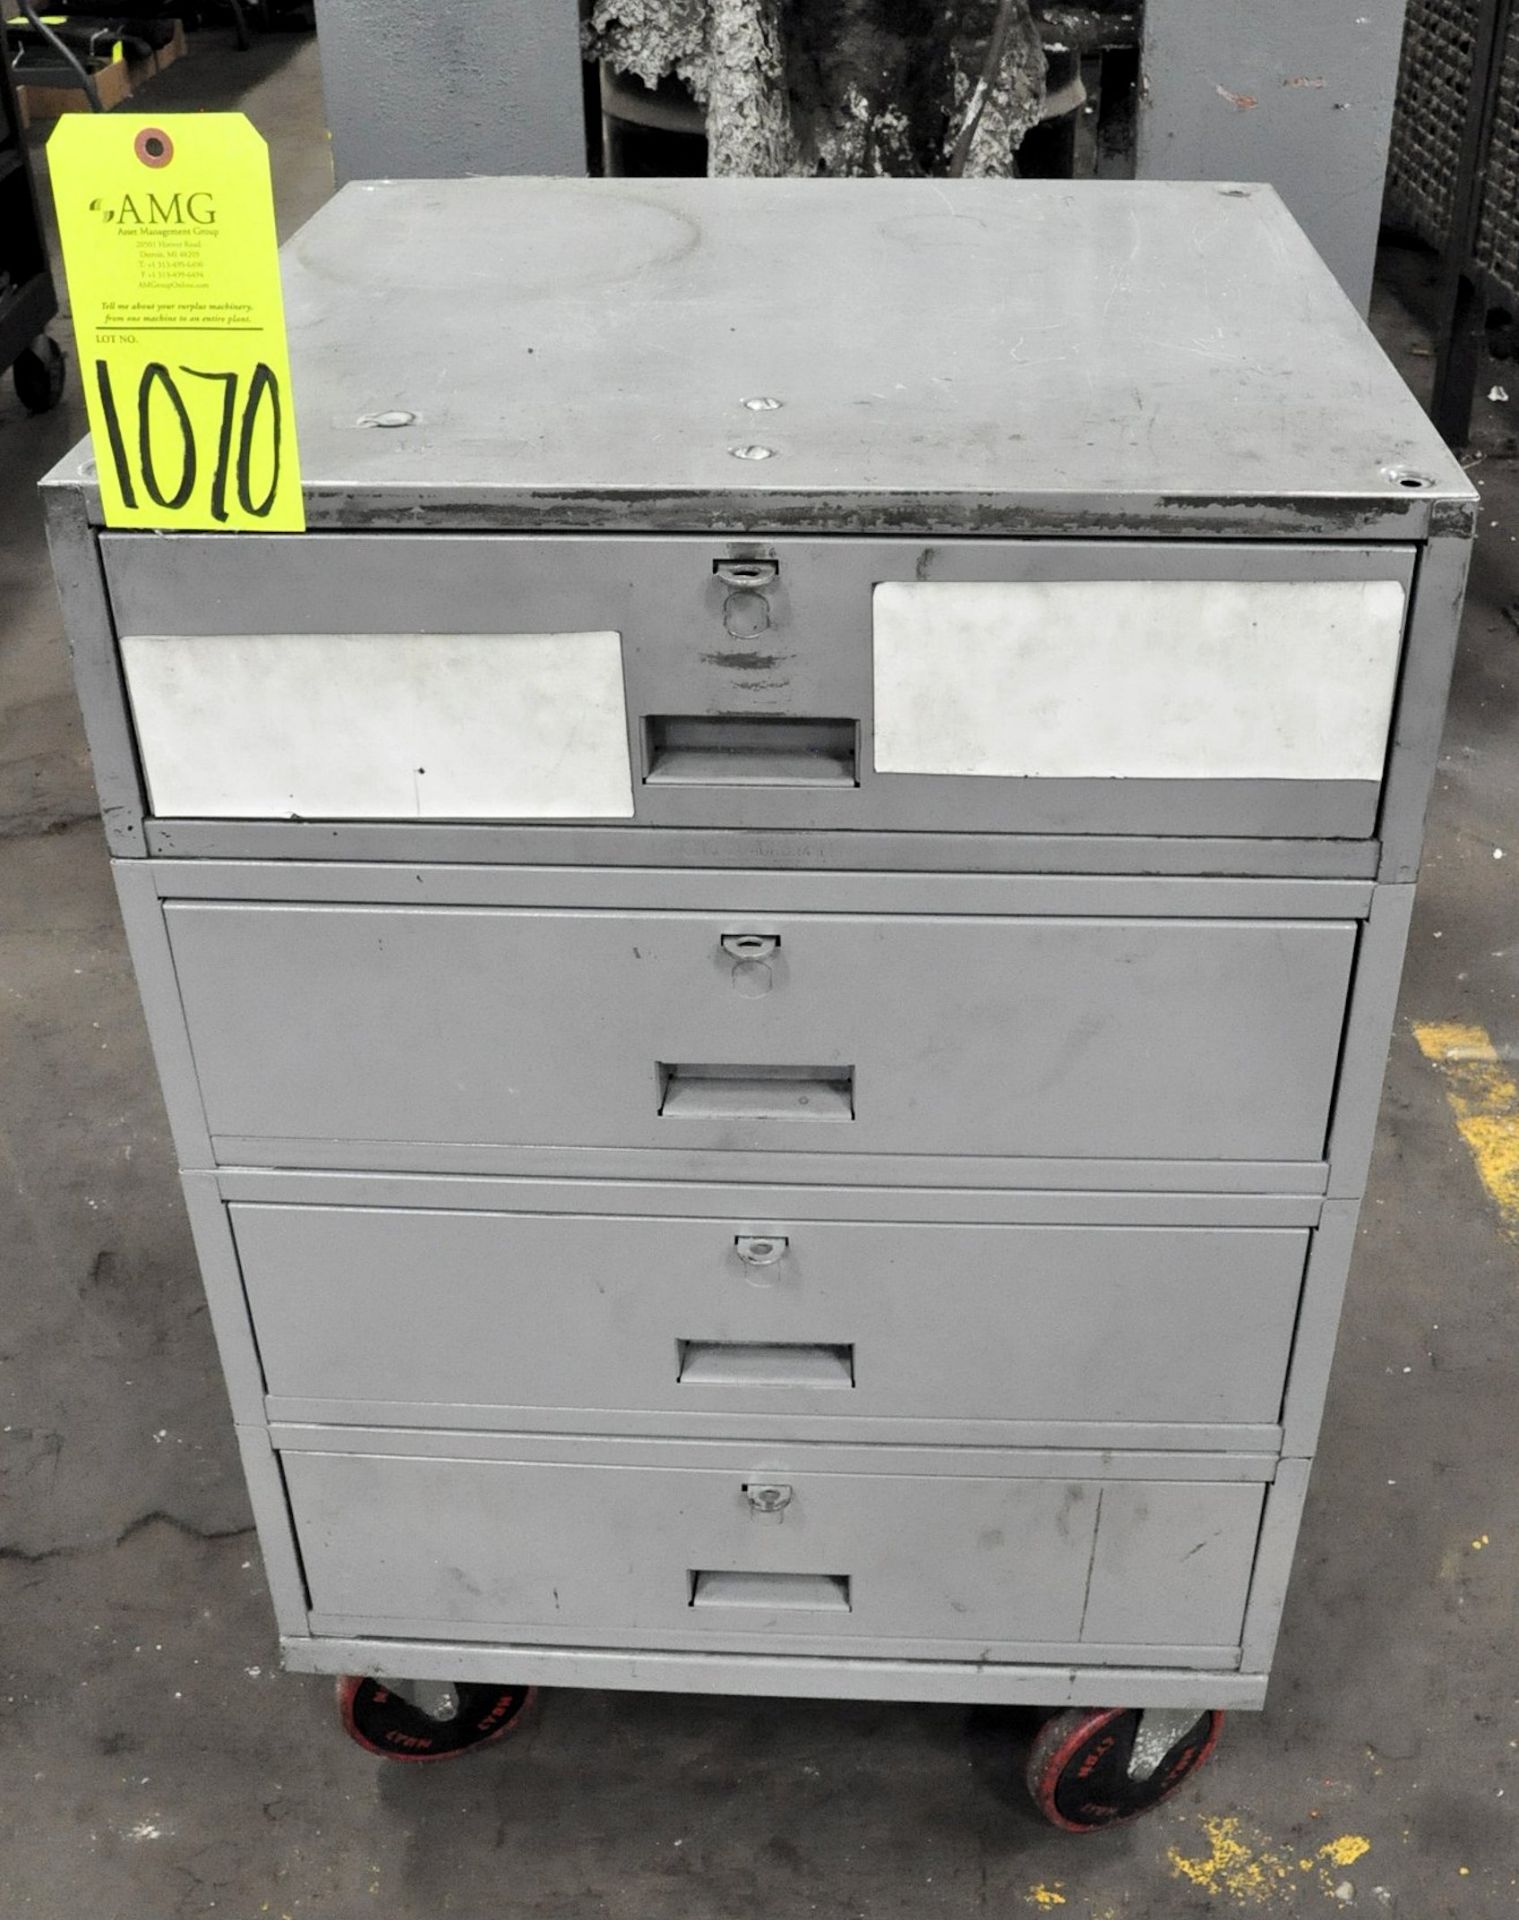 4-Drawer Rolling Cabinet with Misc. Contents, (E-7), (Yellow Tag)